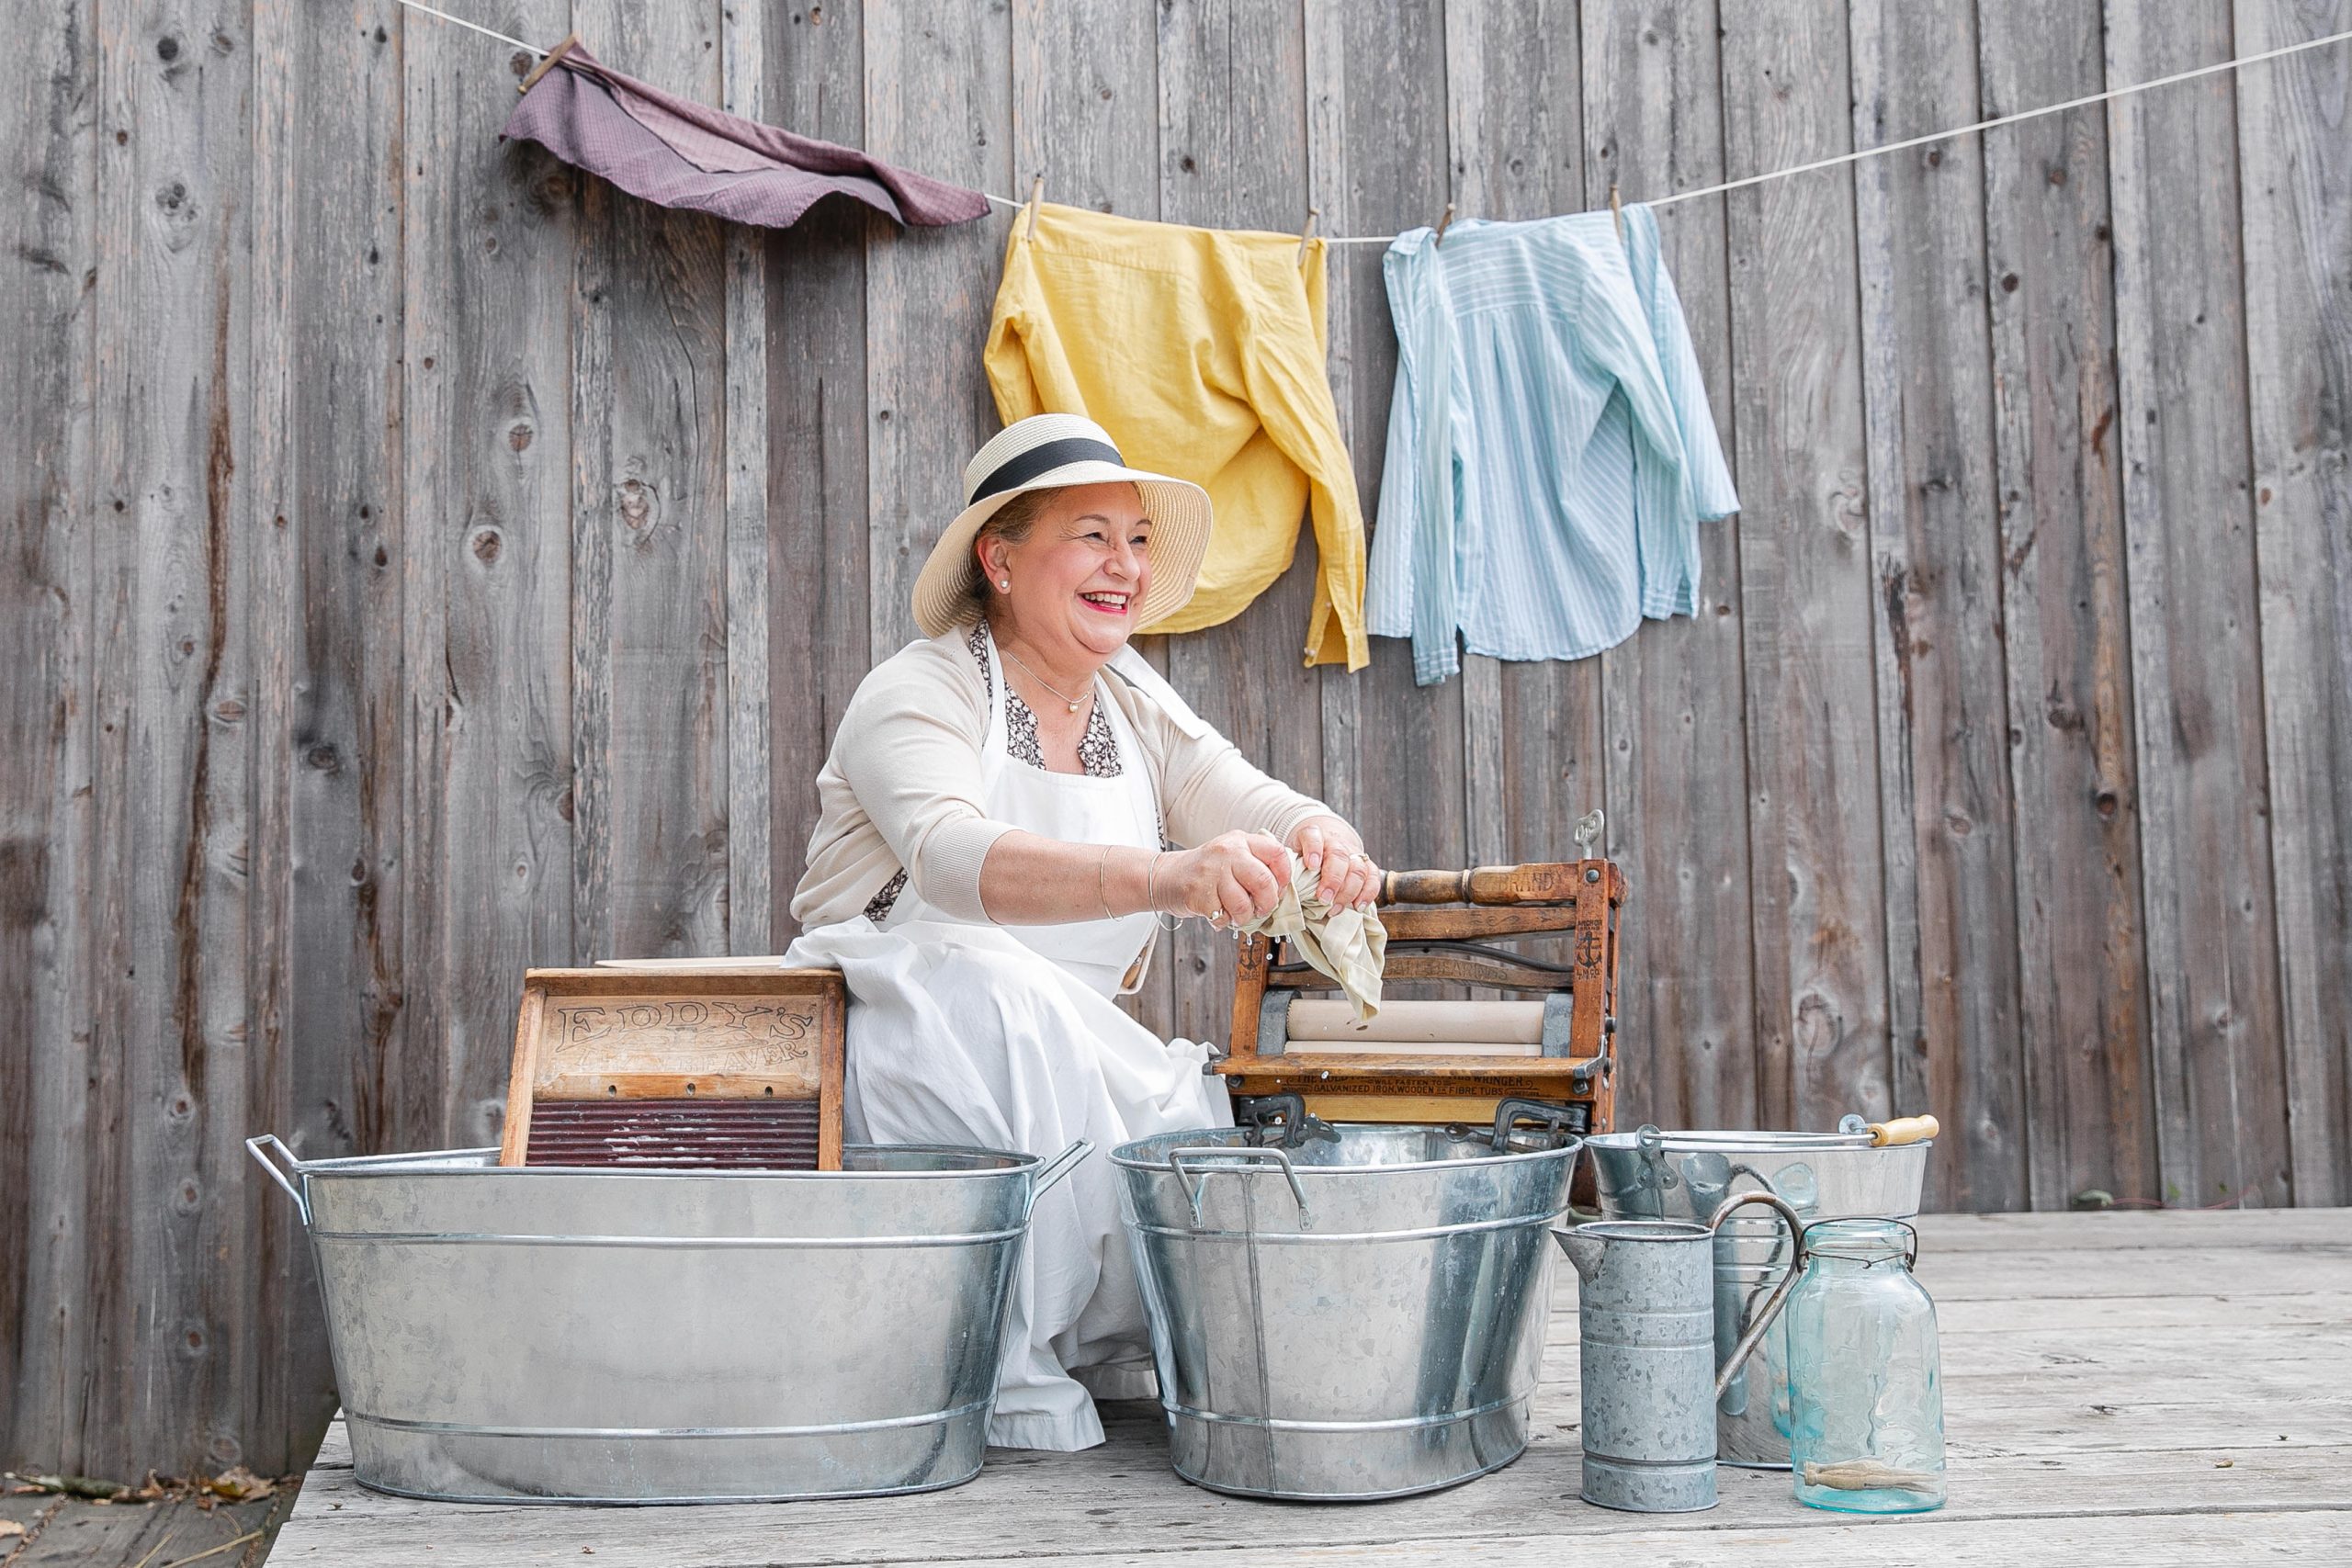 Woman in white dress and apron demonstrating handwash laundry